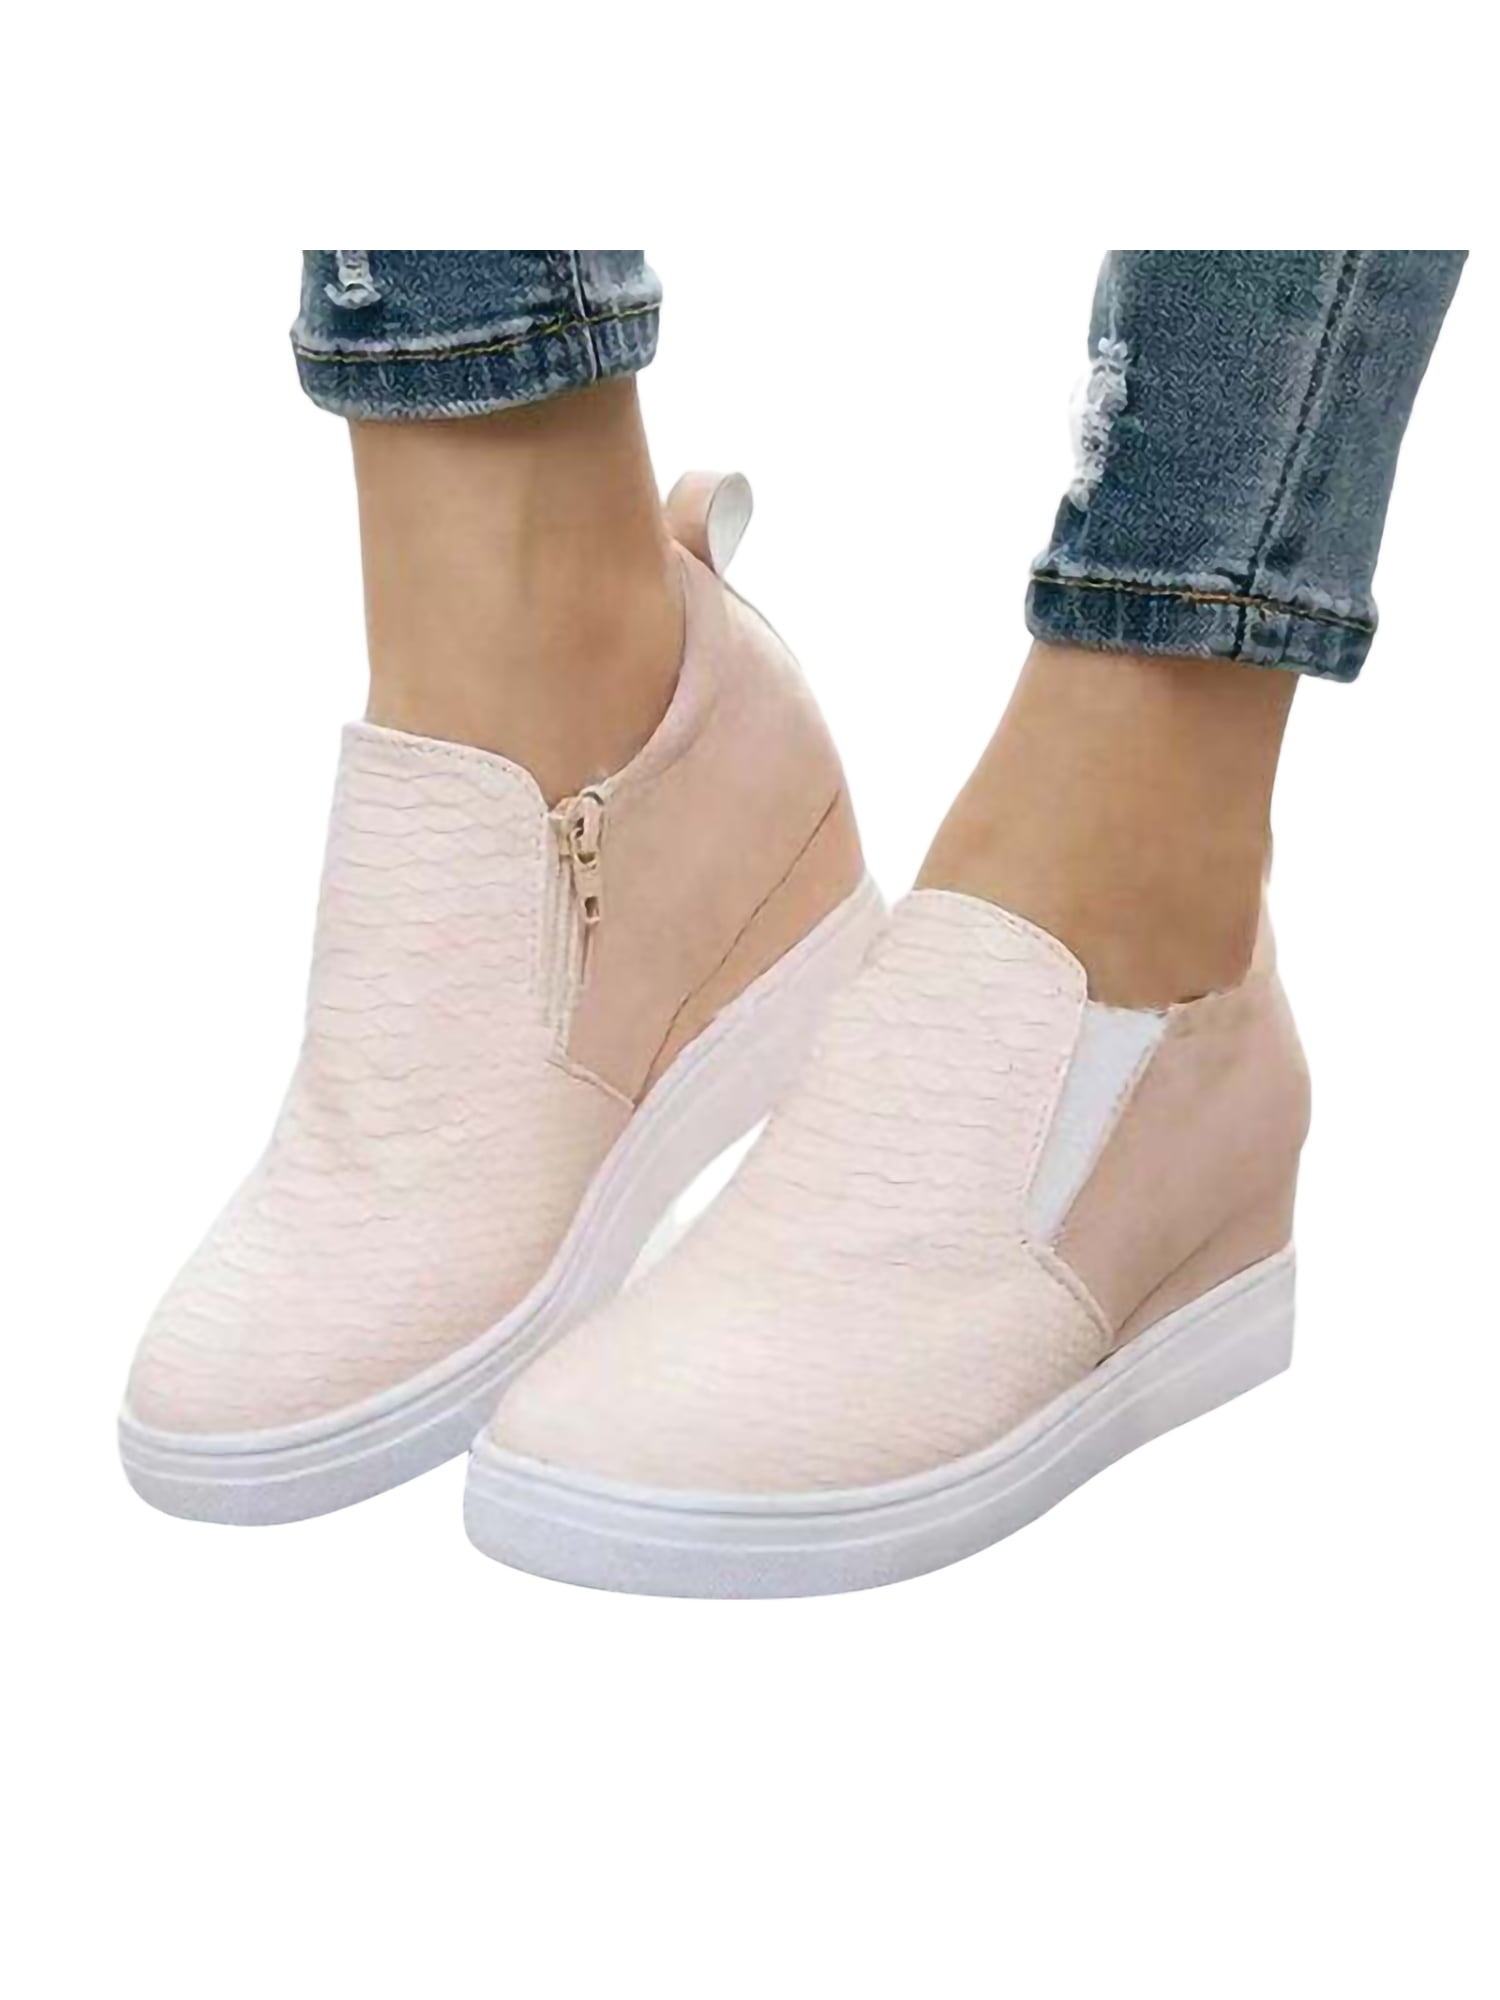 Women Casual Creepers Hidden Wedge Platform Sneakers Fashion Sport Shoes Slip On 